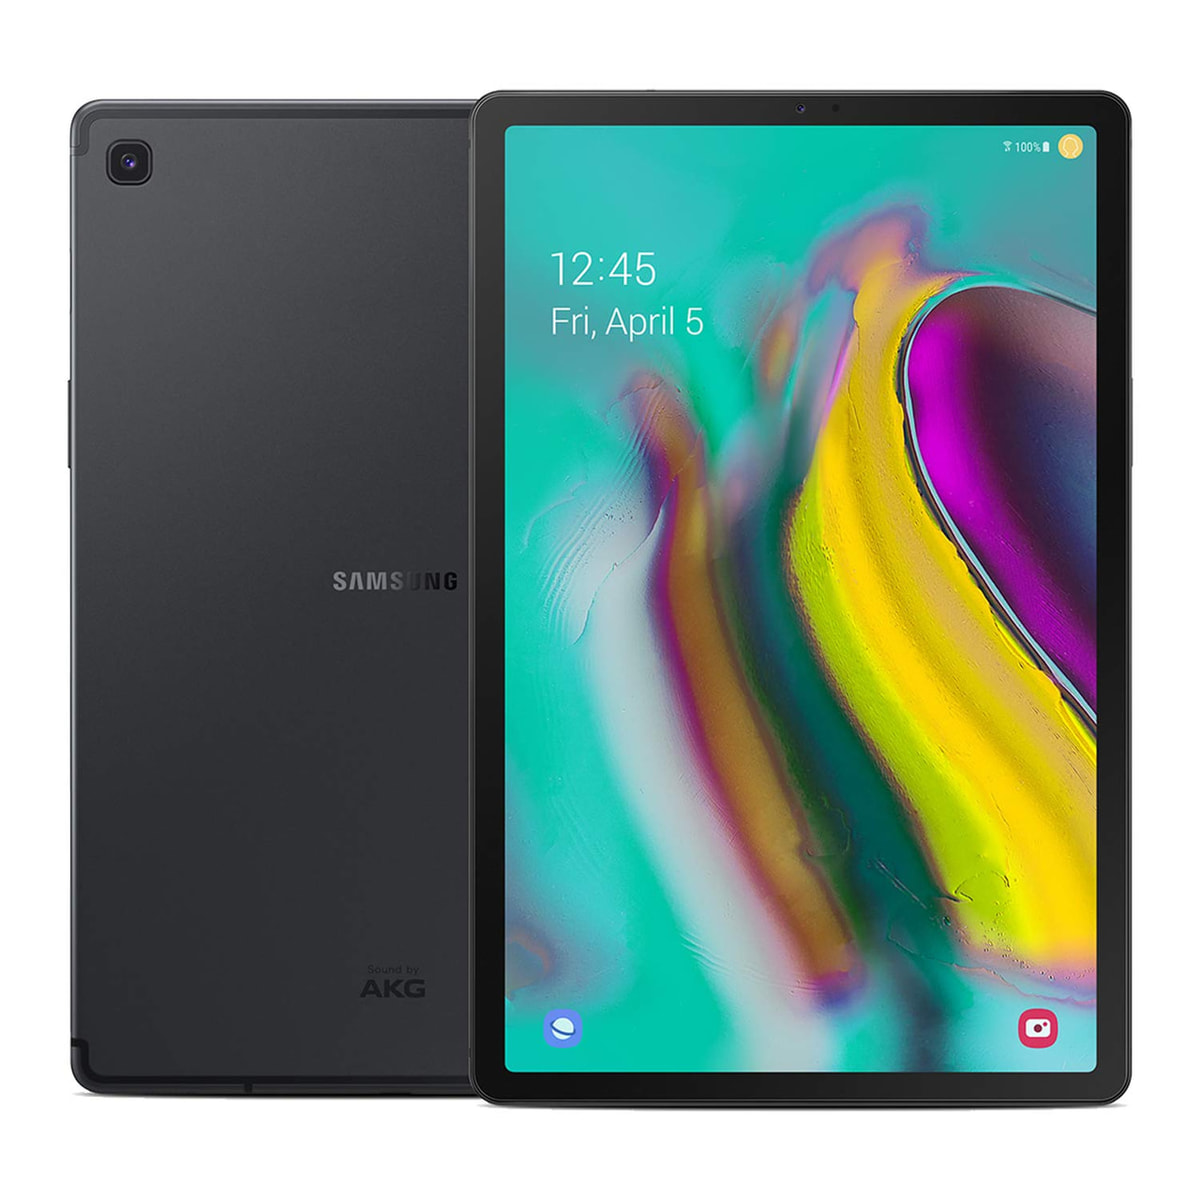 Galaxy Tab S5e」サムスンの10.5型Androidタブレット、同等サイズの他 ...